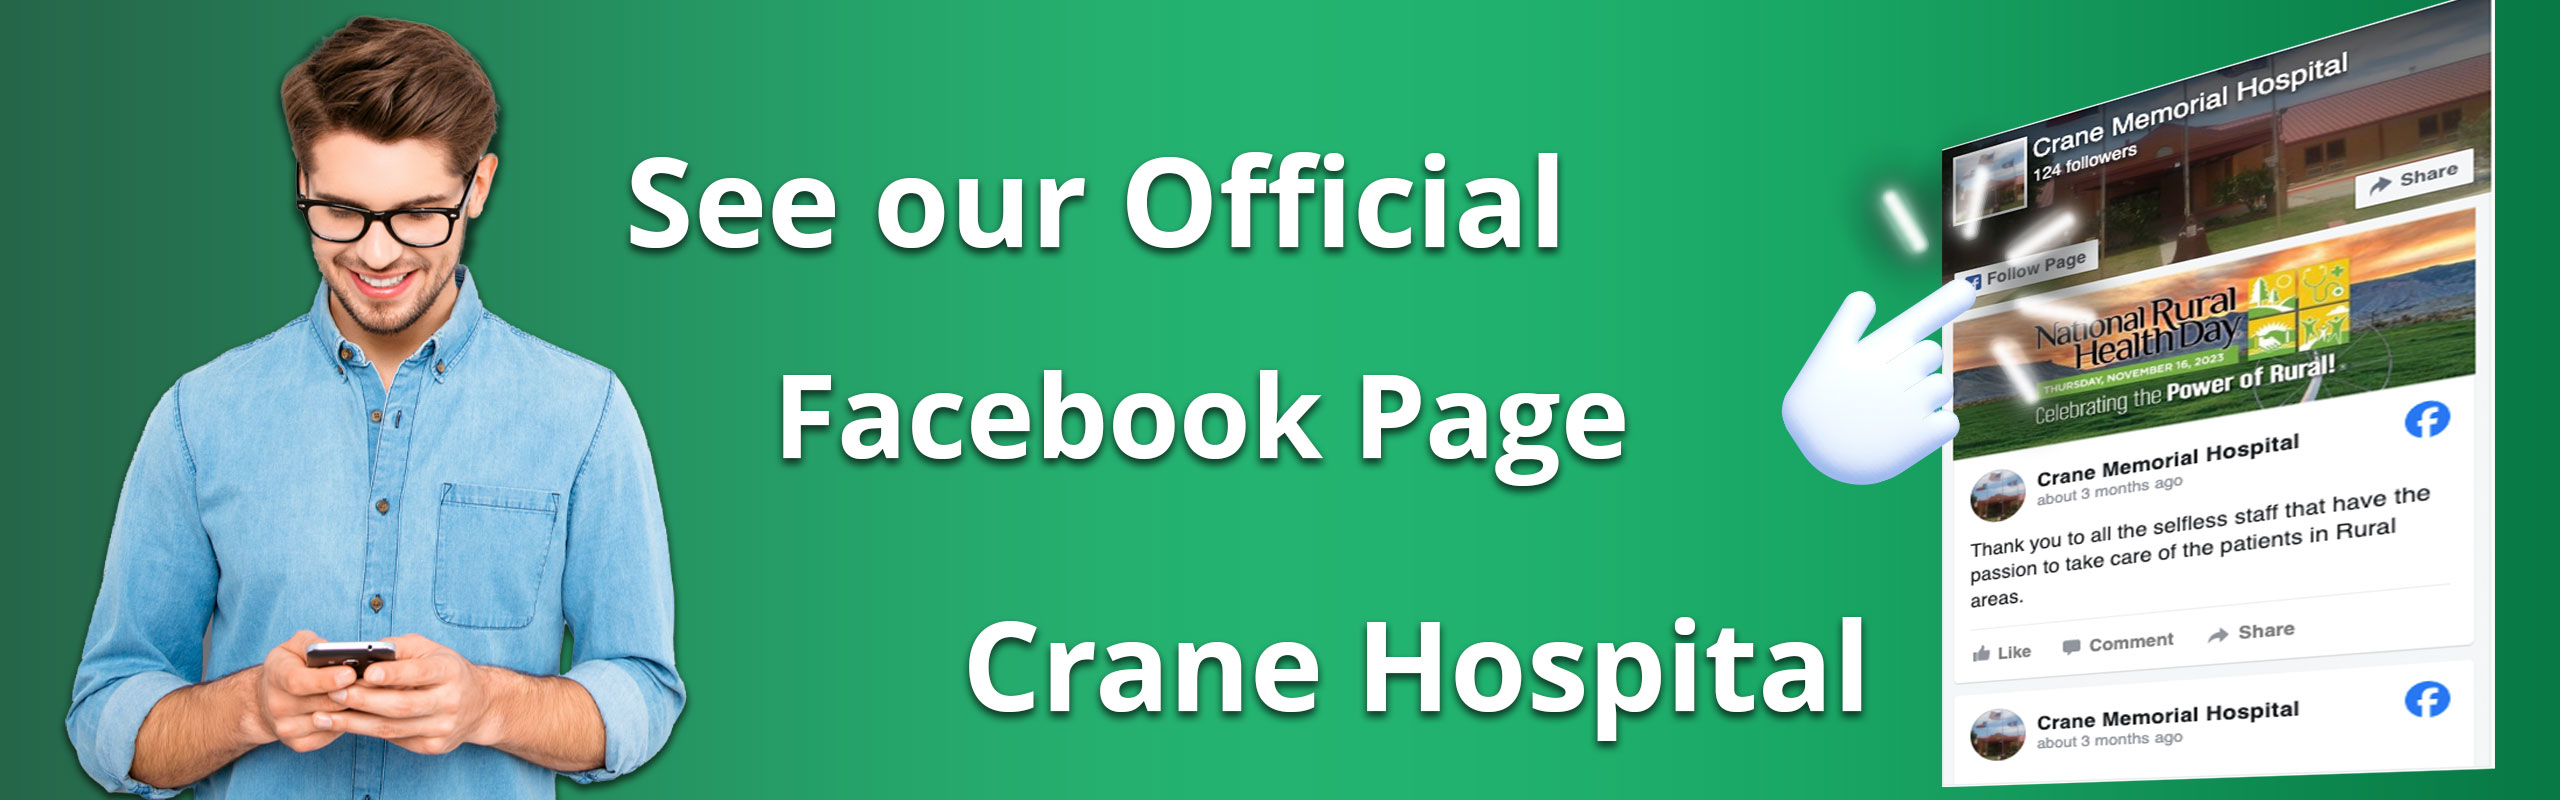 See our Official Facebook Page 
Crane Hospital